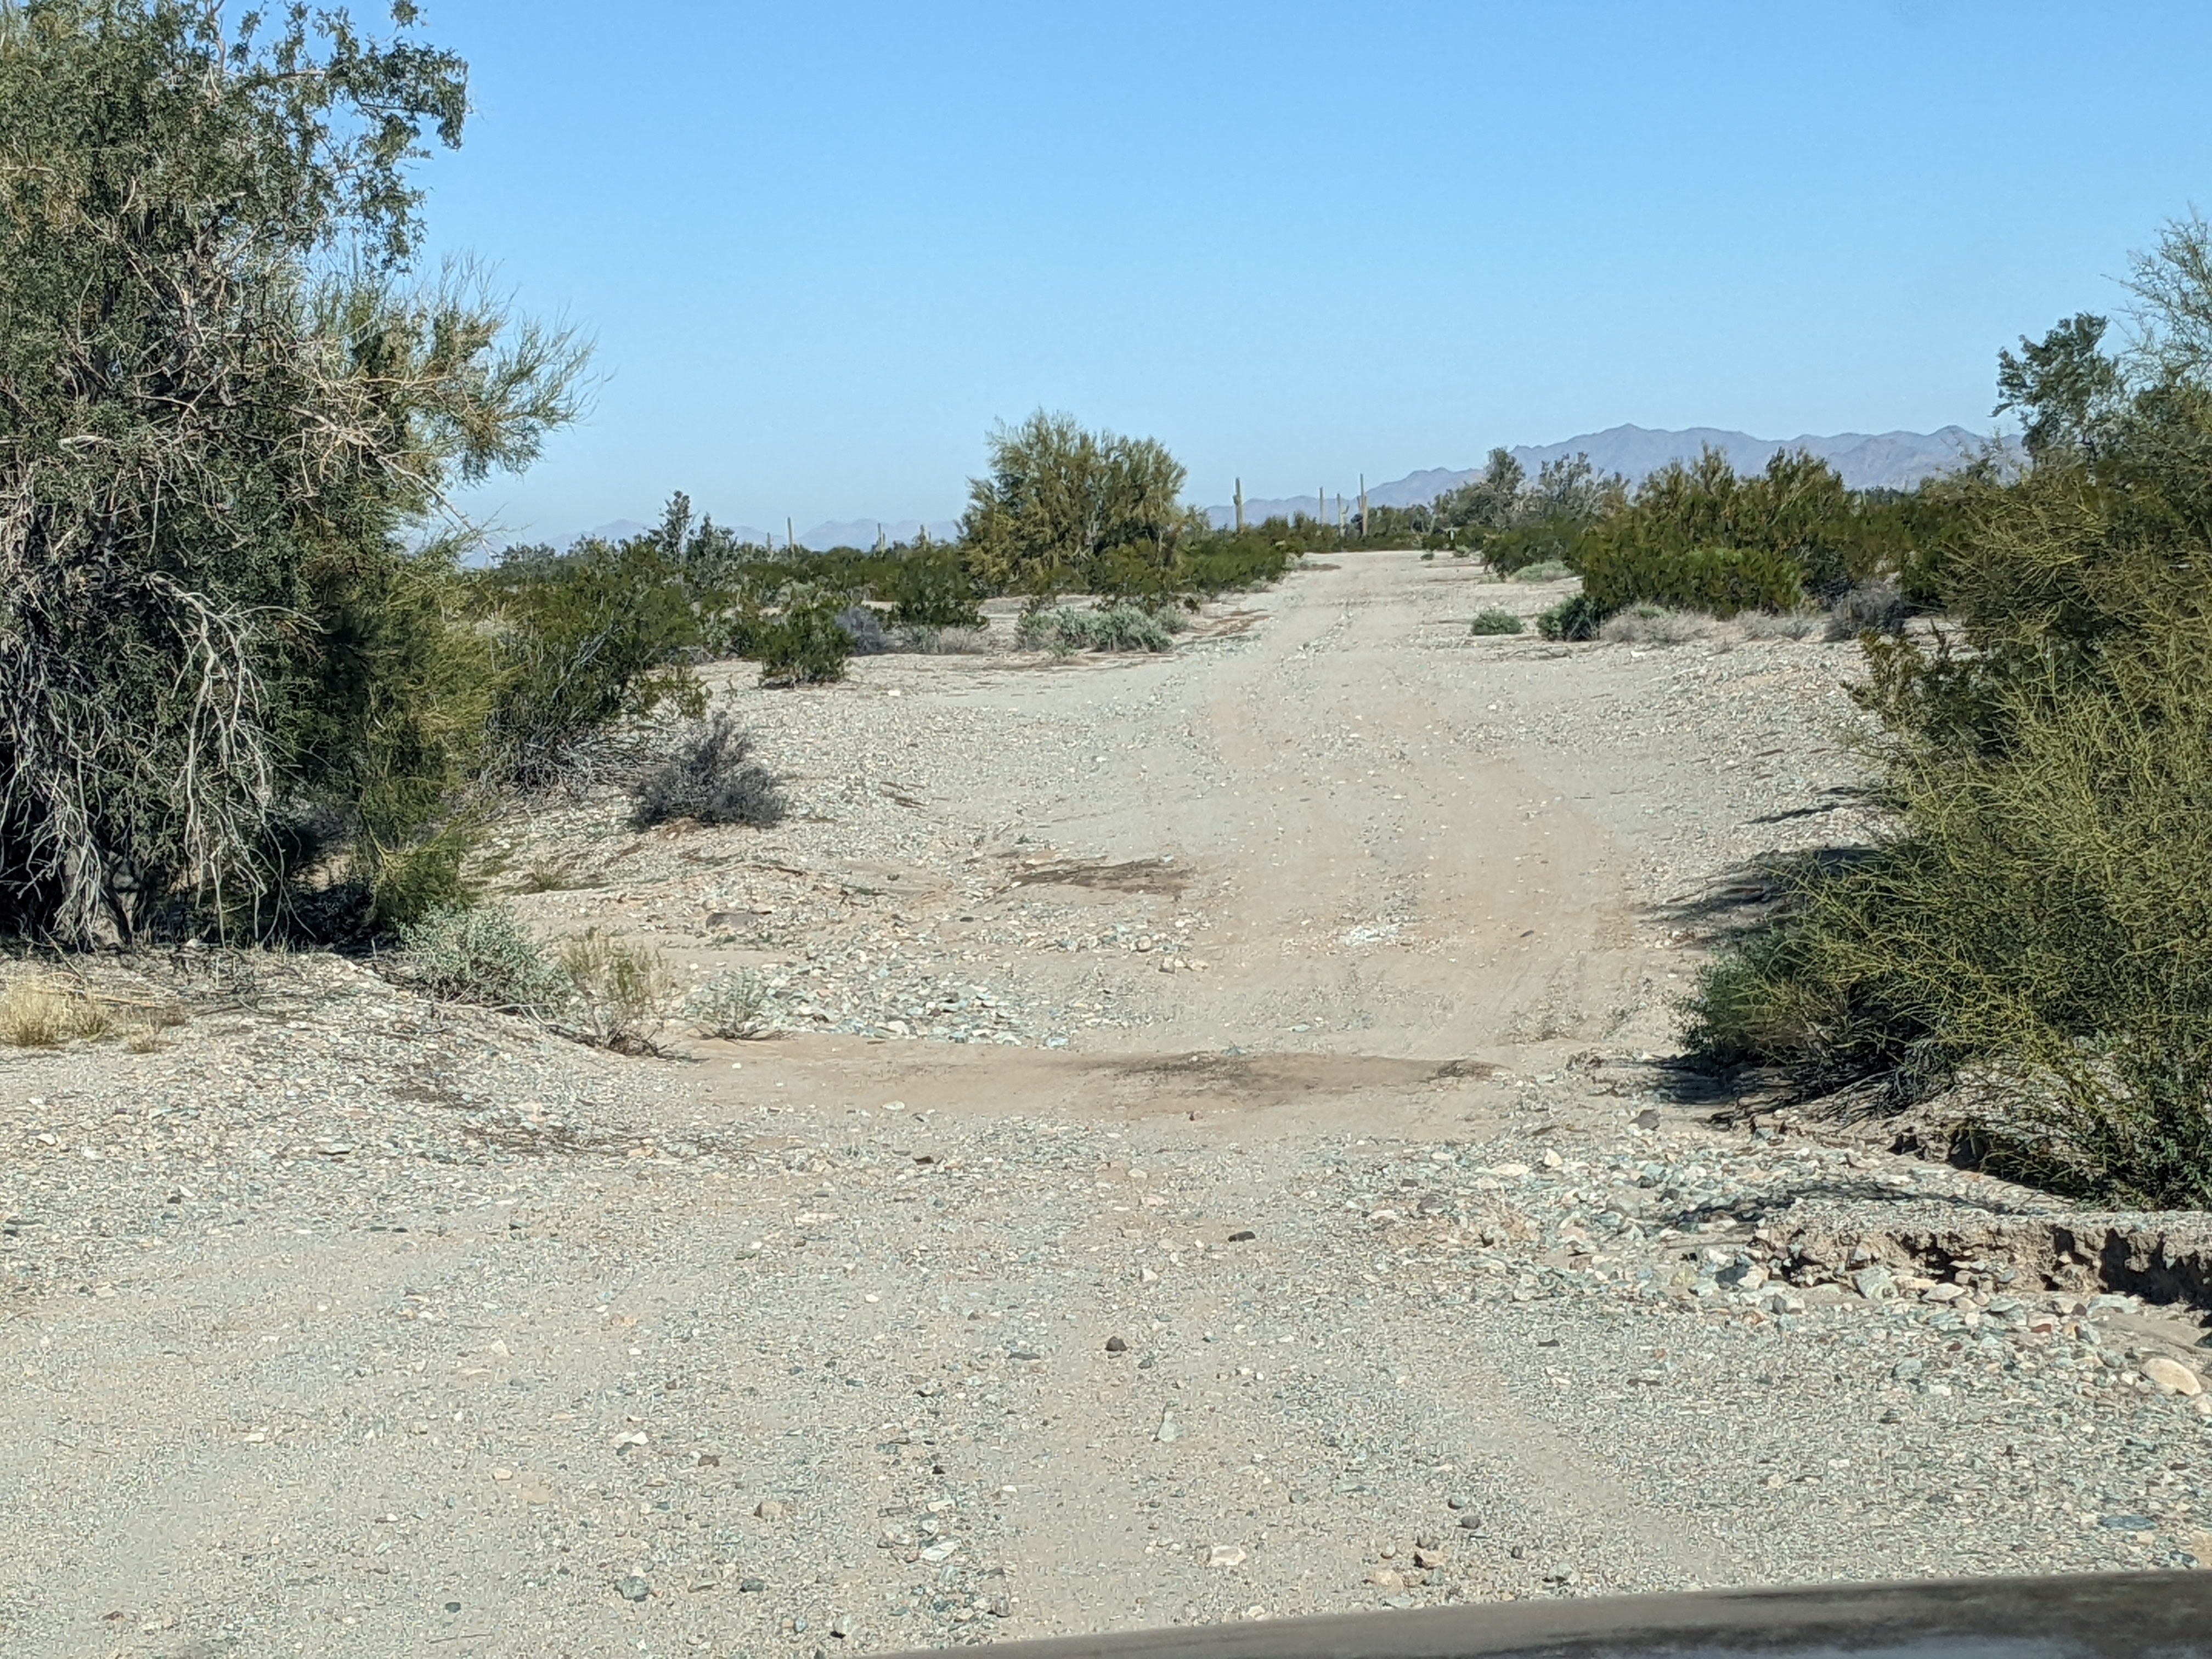 Camper submitted image from BLM Sonoran Desert National Monument - BLM road 8035 access - 3